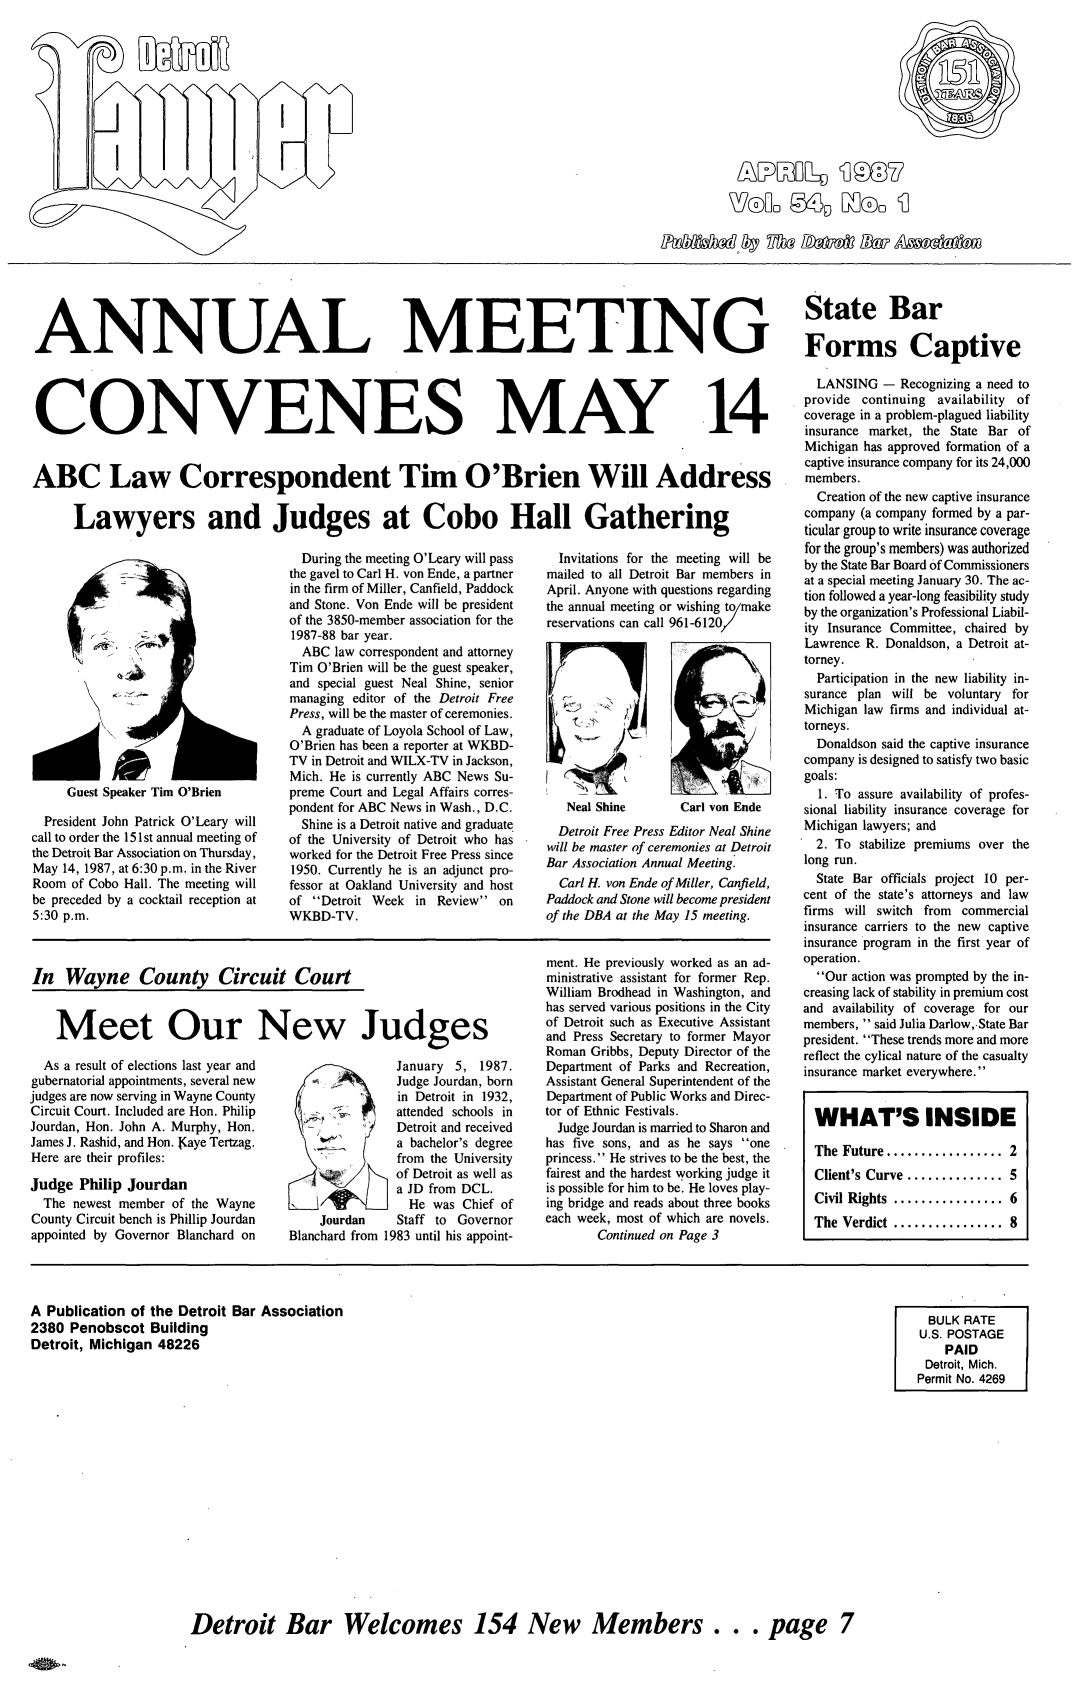 handle is hein.barjournals/detlwyr0054 and id is 1 raw text is: WTOLL  5D Z~oo q

ANNUAL MEETING

CONVENES

MAY

14

ABC Law Correspondent Tim O'Brien Will Address
Lawyers and Judges at Cobo Hall Gathering

Guest Speaker Tim O'Brien

President John Patrick O'Leary will
call to order the 151 st annual meeting of
the Detroit Bar Association on Thursday,
May 14, 1987, at 6:30 p.m. in the River
Room of Cobo Hall. The meeting will
be preceded by a cocktail reception at
5:30 p.m.

During the meeting O'Leary will pass
the gavel to Carl H. von Ende, a partner
in the firm of Miller, Canfield, Paddock
and Stone. Von Ende will be president
of the 3850-member association for the
1987-88 bar year.
ABC law correspondent and attorney
Tim O'Brien will be the guest speaker,
and special guest Neal Shine, senior
managing editor of the Detroit Free
Press, will be the master of ceremonies.
A graduate of Loyola School of Law,
O'Brien has been a reporter at WKBD-
TV in Detroit and WILX-TV in Jackson,
Mich. He is currently ABC News Su-
preme Court and Legal Affairs corres-
pondent for ABC News in Wash., D.C.
Shine is a Detroit native and graduate
of the University of Detroit who has
worked for the Detroit Free Press since
1950. Currently he is an adjunct pro-
fessor at Oakland University and host
of Detroit Week in Review on
WKBD-TV.

In Wayne County CircuitCourt

Meet Our New Judges

As a result of elections last year and
gubernatorial appointments, several new
judges are now serving in Wayne County
Circuit Court. Included are Hon. Philip
Jourdan, Hon. John A. Murphy, Hon.
James J. Rashid, and Hon. raye Tertzag.
Here are their profiles:
Judge Philip Jourdan
The newest member of the Wayne
County Circuit bench is Phillip Jourdan
appointed by Governor Blanchard on

January 5, 1987.
Judge Jourdan, born
in Detroit in 1932,
attended schools in
Detroit and received
a bachelor's degree
from the University
of Detroit as well as
a JD from DCL.
He was Chief of
Jourdan     Staff to Governor
Blanchard from 1983 until his appoint-

Invitations for the meeting will be
mailed to all Detroit Bar members in
April. Anyone with questions regarding
the annual meeting or wishing to/make
reservations can call 961-6120/

Neal Shine        Carl von Ende
Detroit Free Press Editor Neal Shine
will be master of ceremonies at Detroit
Bar Association Annual Meeting.
Carl H. von Ende of Miller, Canfield,
Paddock and Stone will become president
of the DBA at the May 15 meeting.
ment. He previously worked as an ad-
ministrative assistant for former Rep.
William Brodhead in Washington, and
has served various positions in the City
of Detroit such as Executive Assistant
and Press Secretary to former Mayor
Roman Gribbs, Deputy Director of the
Department of Parks and Recreation,
Assistant General Superintendent of the
Department of Public Works and Direc-
tor of Ethnic Festivals.
Judge Jourdan is married to Sharon and
has five sons, and as he says one
princess. He strives to be the best, the
fairest and the hardest working judge it
is possible for him to be. He loves play-
ing bridge and reads about three books
each week, most of which are novels.
Continued on Page 3

State Bar
Forms Captive
LANSING - Recognizing a need to
provide continuing availability of
coverage in a problem-plagued liability
insurance market, the State Bar of
Michigan has approved formation of a
captive insurance company for its 24,000
members.
Creation of the new captive insurance
company (a company formed by a par-
ticular group to write insurance coverage
for the group's members) was authorized
by the State Bar Board of Commissioners
at a special meeting January 30. The ac-
tion followed a year-long feasibility study
by the organization's Professional Liabil-
ity Insurance Committee, chaired by
Lawrence R. Donaldson, a Detroit at-
torney.
Participation in the new liability in-
surance plan will be voluntary for
Michigan law firms and individual at-
torneys.
Donaldson said the captive insurance
company is designed to satisfy two basic
goals:
1. To assure availability of profes-
sional liability insurance coverage for
Michigan lawyers; and
2. To stabilize premiums over the
long run.
State Bar officials project 10 per-
cent of the state's attorneys and law
firms will switch from commercial
insurance carriers to the new captive
insurance program in the first year of
operation.
Our action was prompted by the in-
creasing lack of stability in premium cost
and availability of coverage for our
members,  said Julia Darlow,.State Bar
president. These trends more and more
reflect the cylical nature of the casualty
insurance market everywhere.
WHAT'S INSIDE
The Future ................. 2
Client's Curve .............. 5
Civil Rights ................ 6
The Verdict ................ 8

A Publication of the Detroit
2380 Penobscot Building
Detroit, Michigan 48226

Bar Association

BULK RATE
U.S. POSTAGE
PAID
Detroit, Mich.
Permit No. 4269

Detroit Bar Welcomes 154 New Members... page 7


